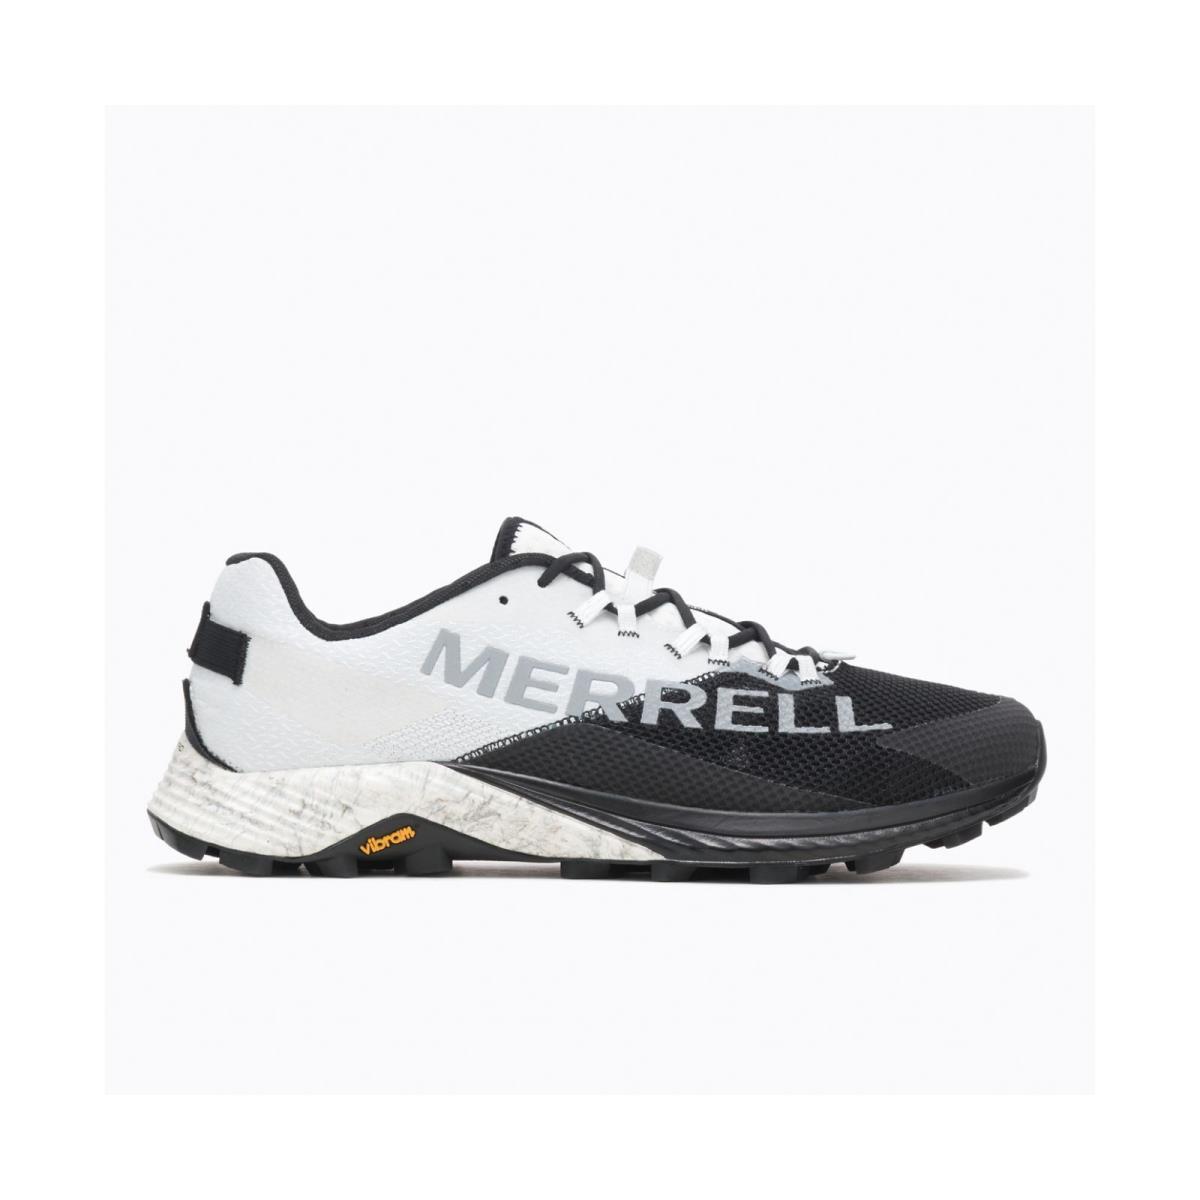 Merrell Women`s Lightweight Breathable Reflective Anti-microbial Athletic Shoes BLACK/WHITE